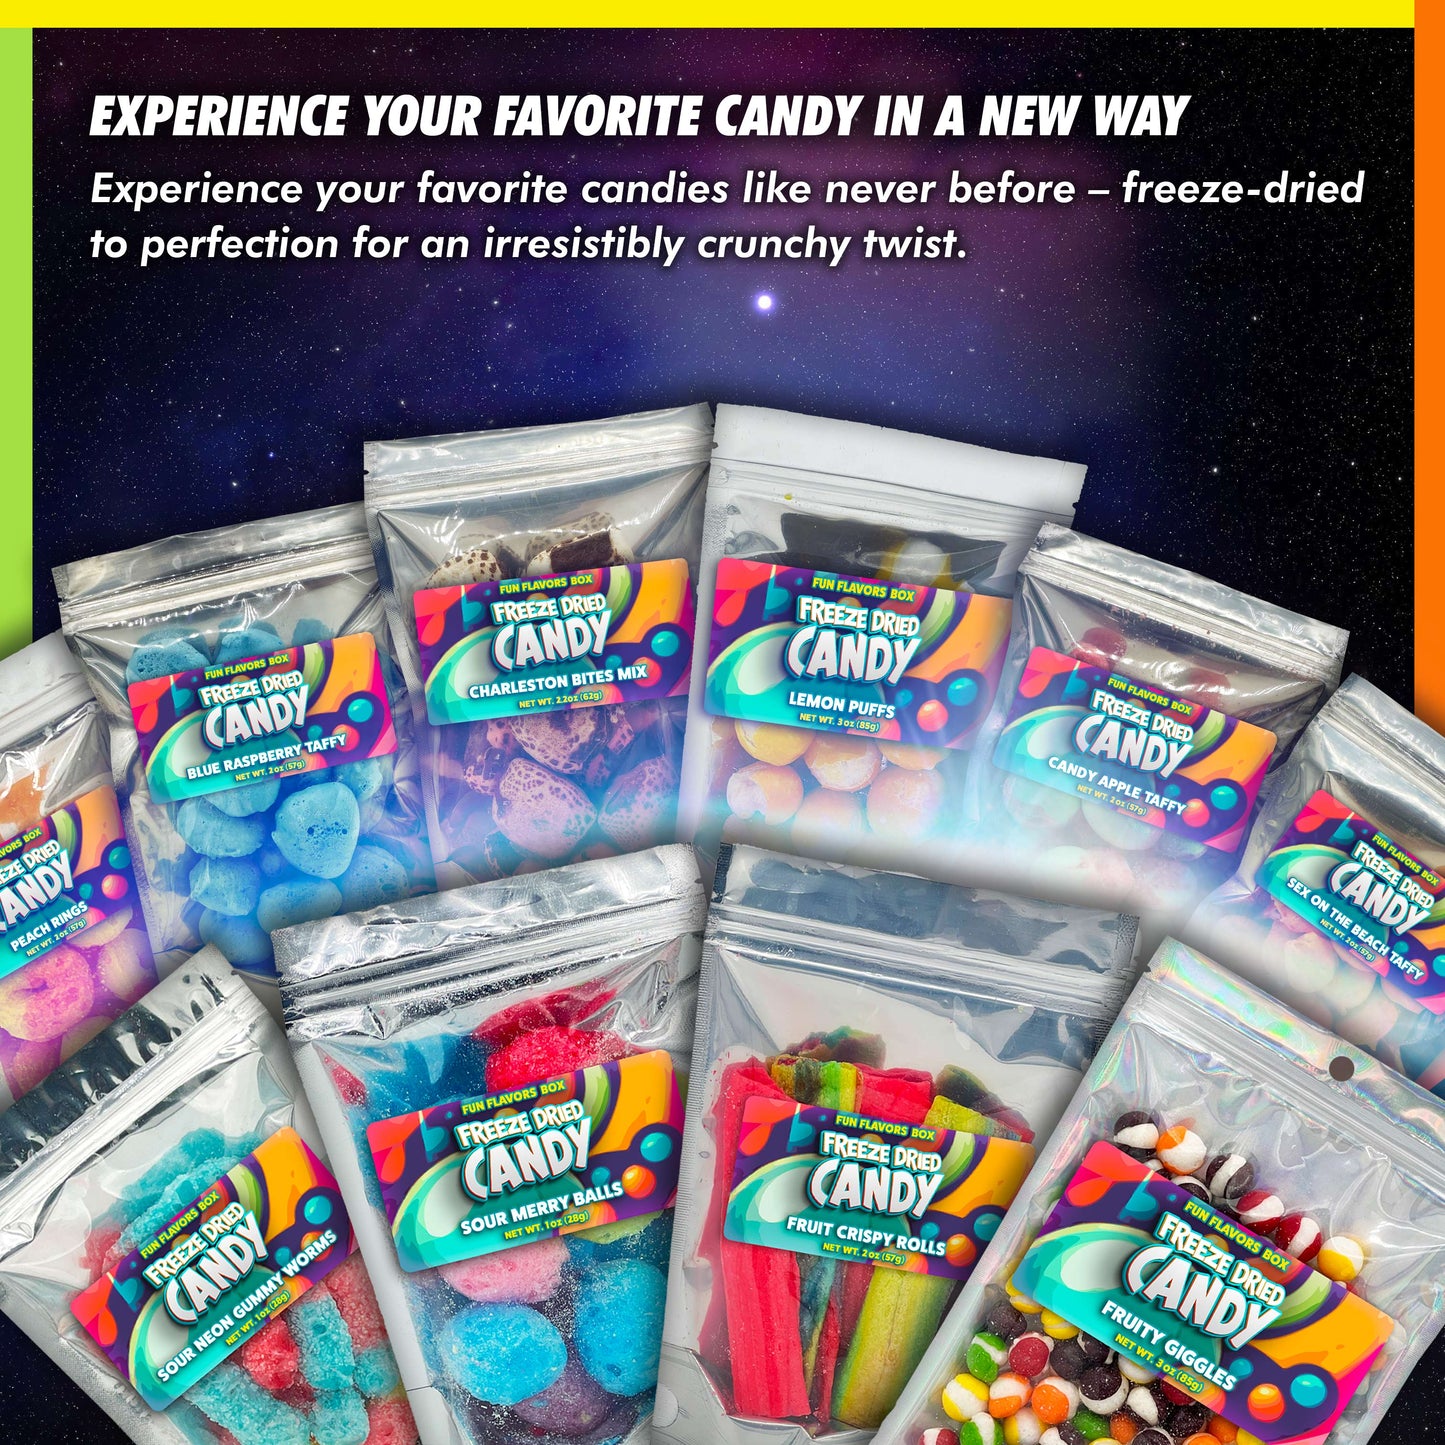 Freeze Dried Candy Sour Fruity Giggles Variety Pack – Crunchy Unique Snack Treats, 4 oz